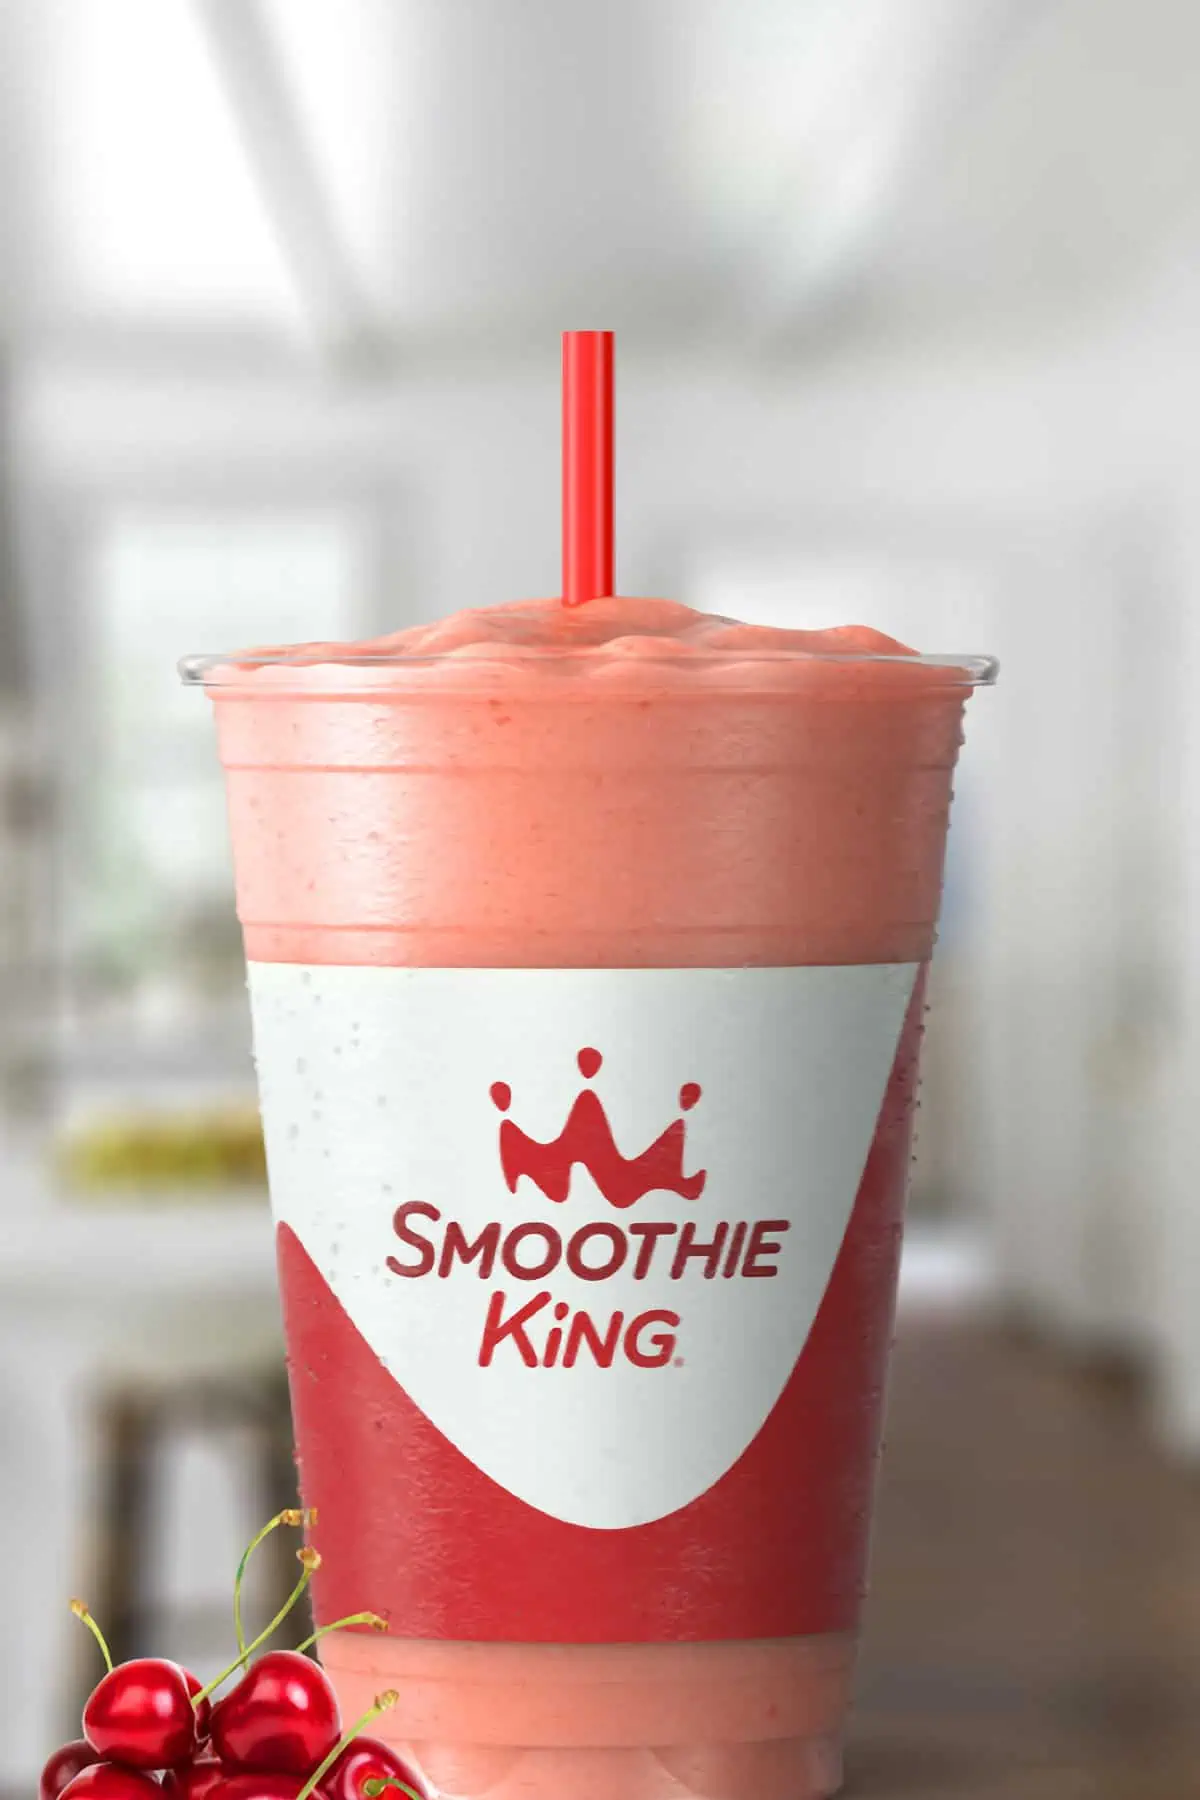 Smoothie King Stretch And Flex Tart Cherry smoothie in a glass, on my kitchen counter, surrounded by fresh fruit.